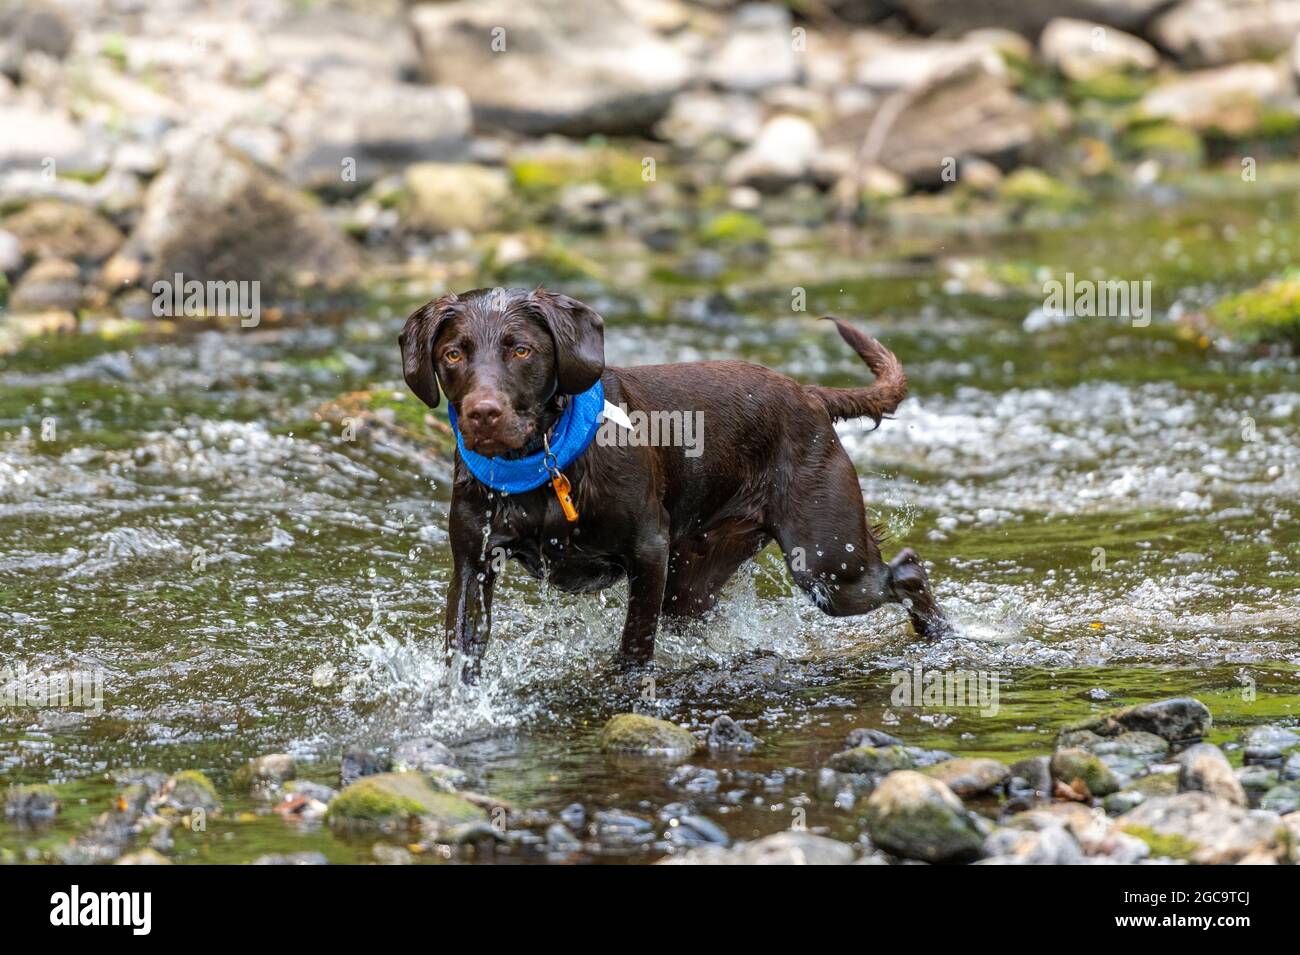 labradinger dog, cross-bred dog, labrador, springer spaniel cross, springerdor, springador, shooting dog, fit and healthy dog, dog swimming in river. Stock Photo